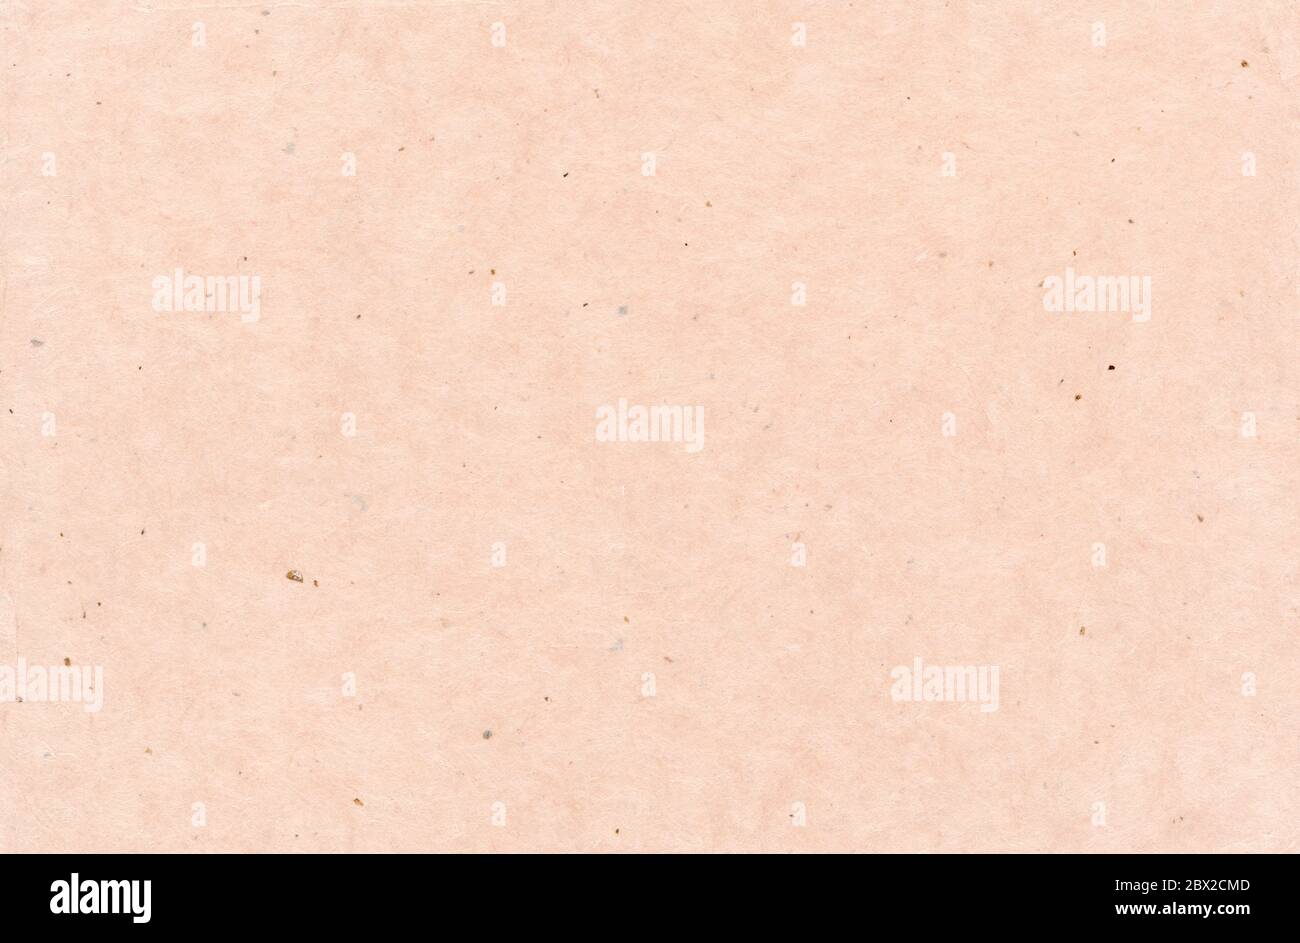 hand made japanese traditional washi paper texture Stock Photo